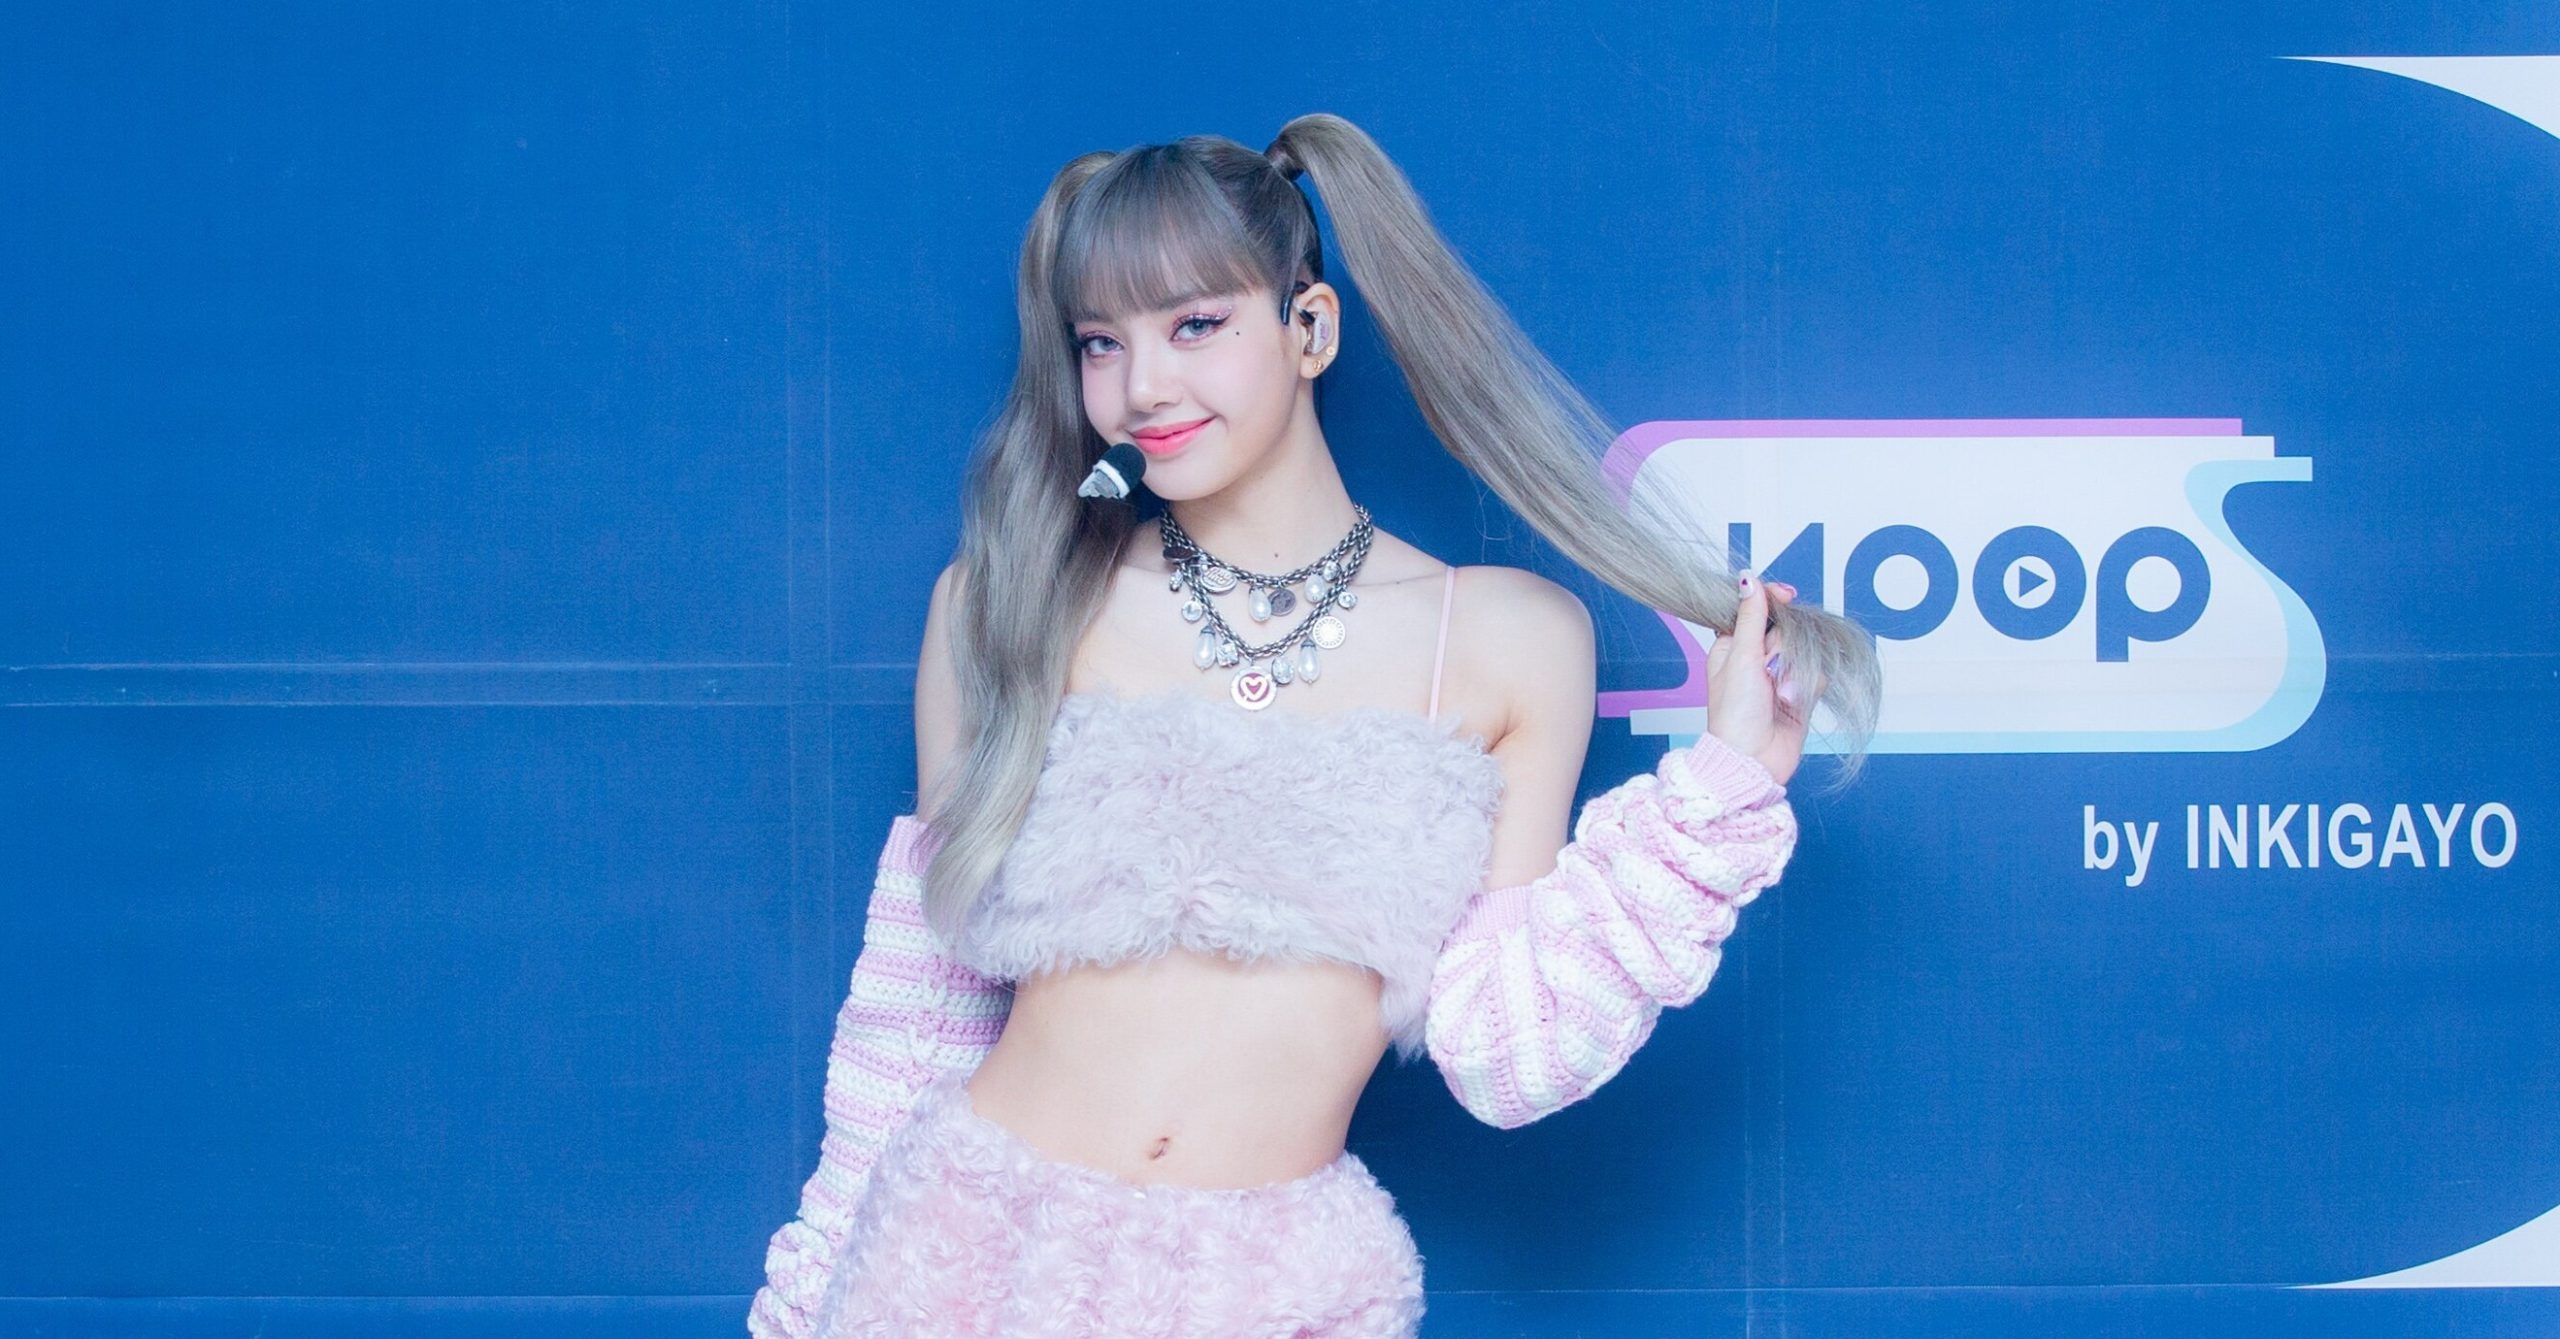 Why Blackpink's Lisa might become the new face of Miu Miu